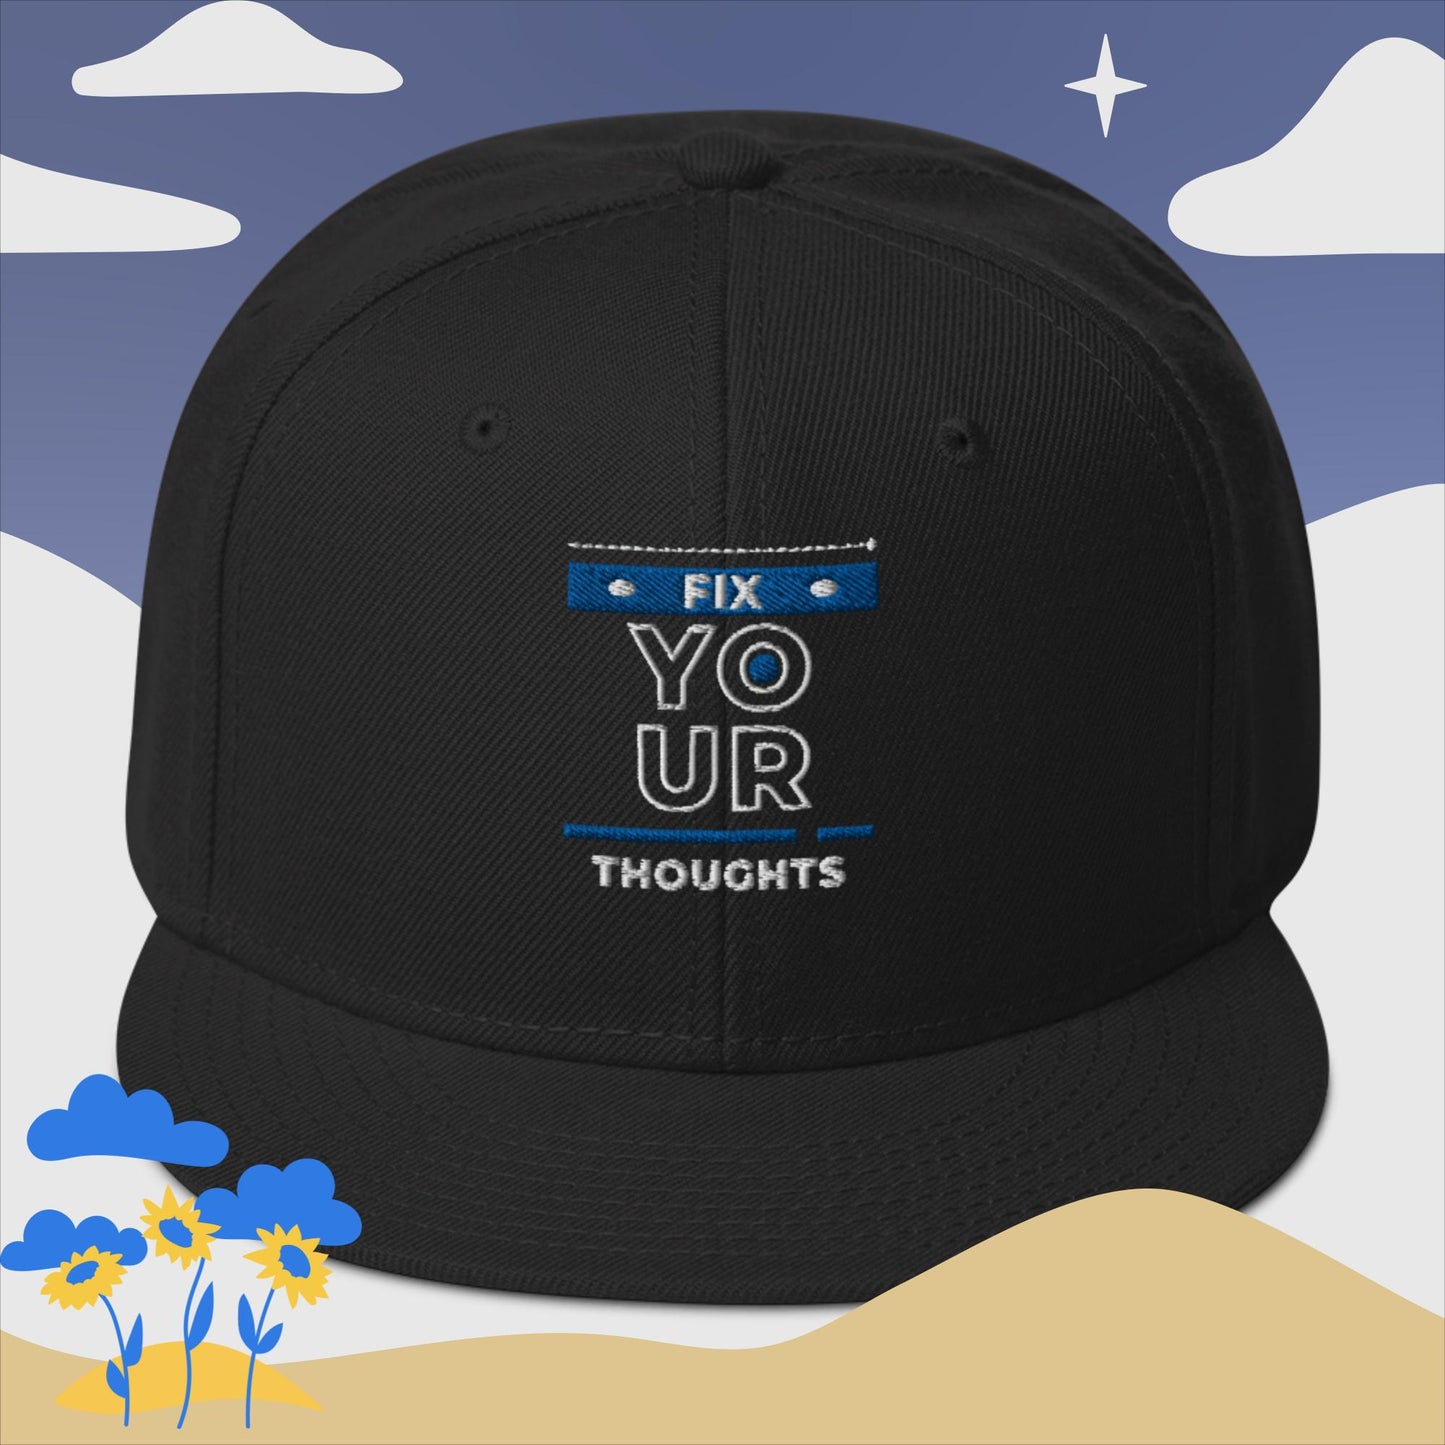 "Fix Your Thoughts" Snapback Hat